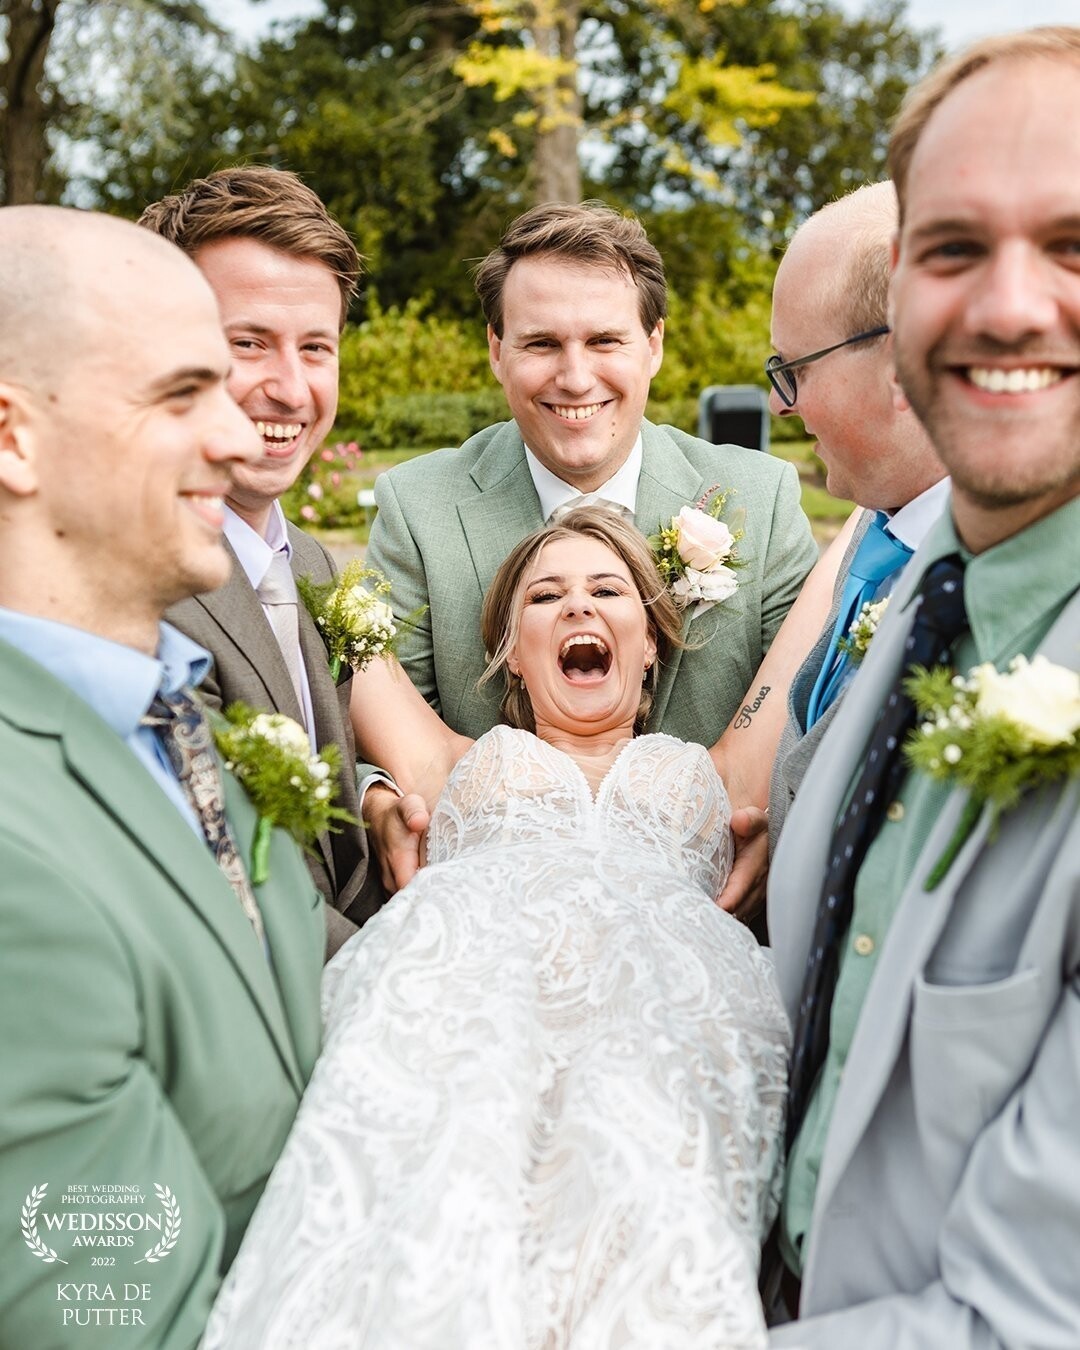 This photo is taken on the weddingday of E & A. The bride is such an enthusiastic young woman. She would do anything for the perfect groupfoto with her friendgroup. This photo is taken a little moment before she was thrown high in to the air. She had no fear at all! Fearless bride!